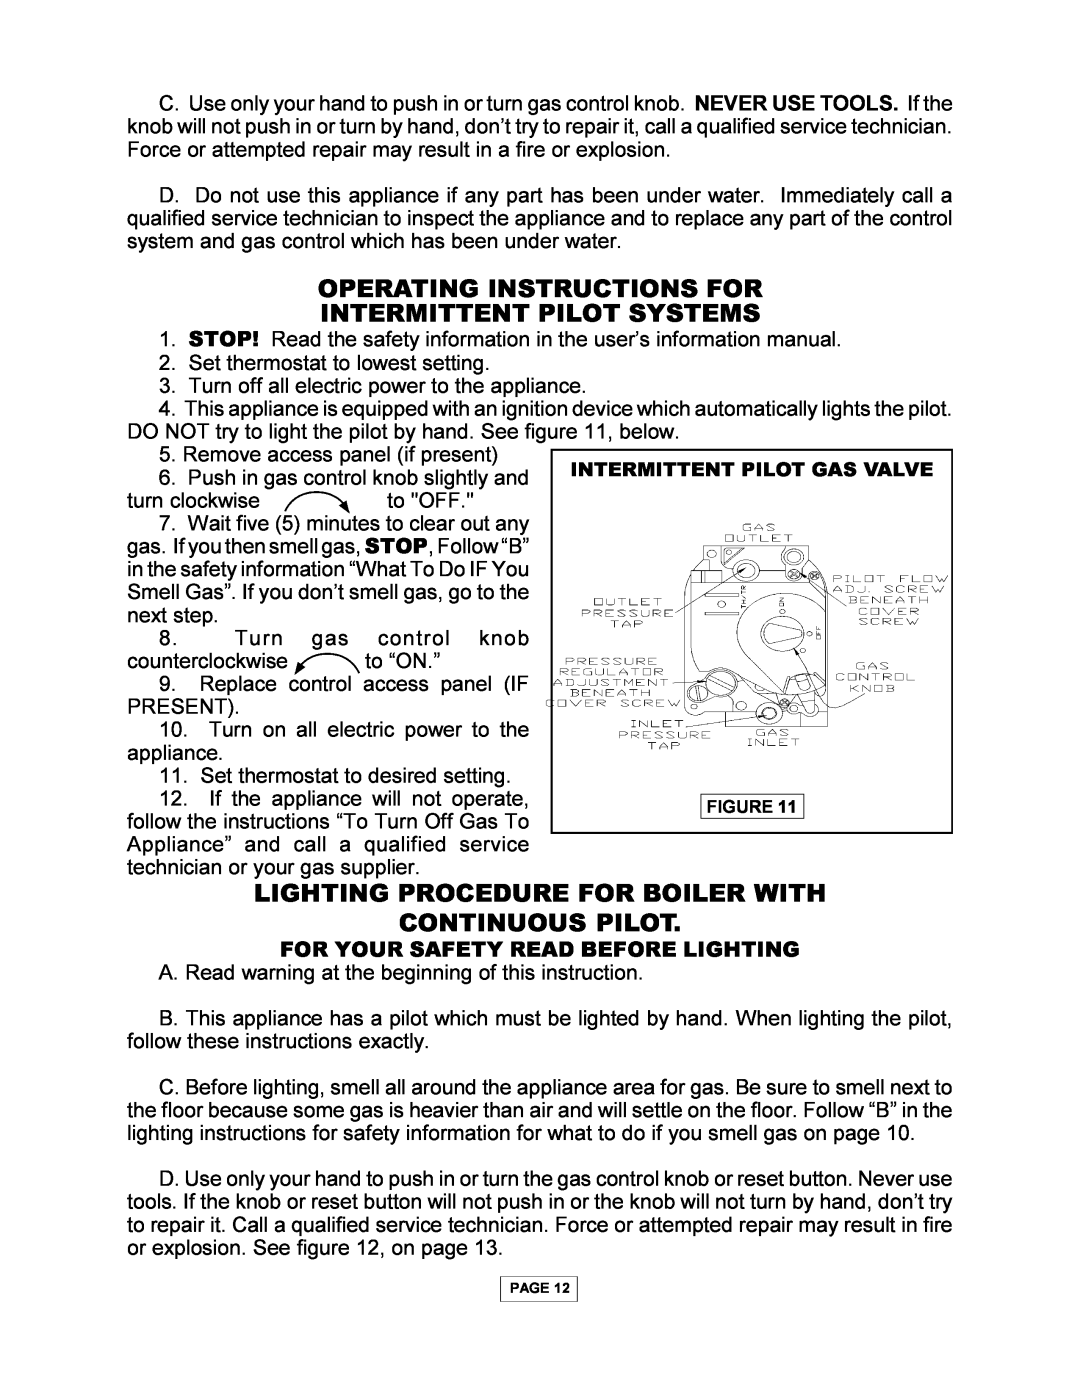 Utica PEG-C Operating Instructions For, Intermittent Pilot Systems, Continuous Pilot, Lighting Procedure For Boiler With 